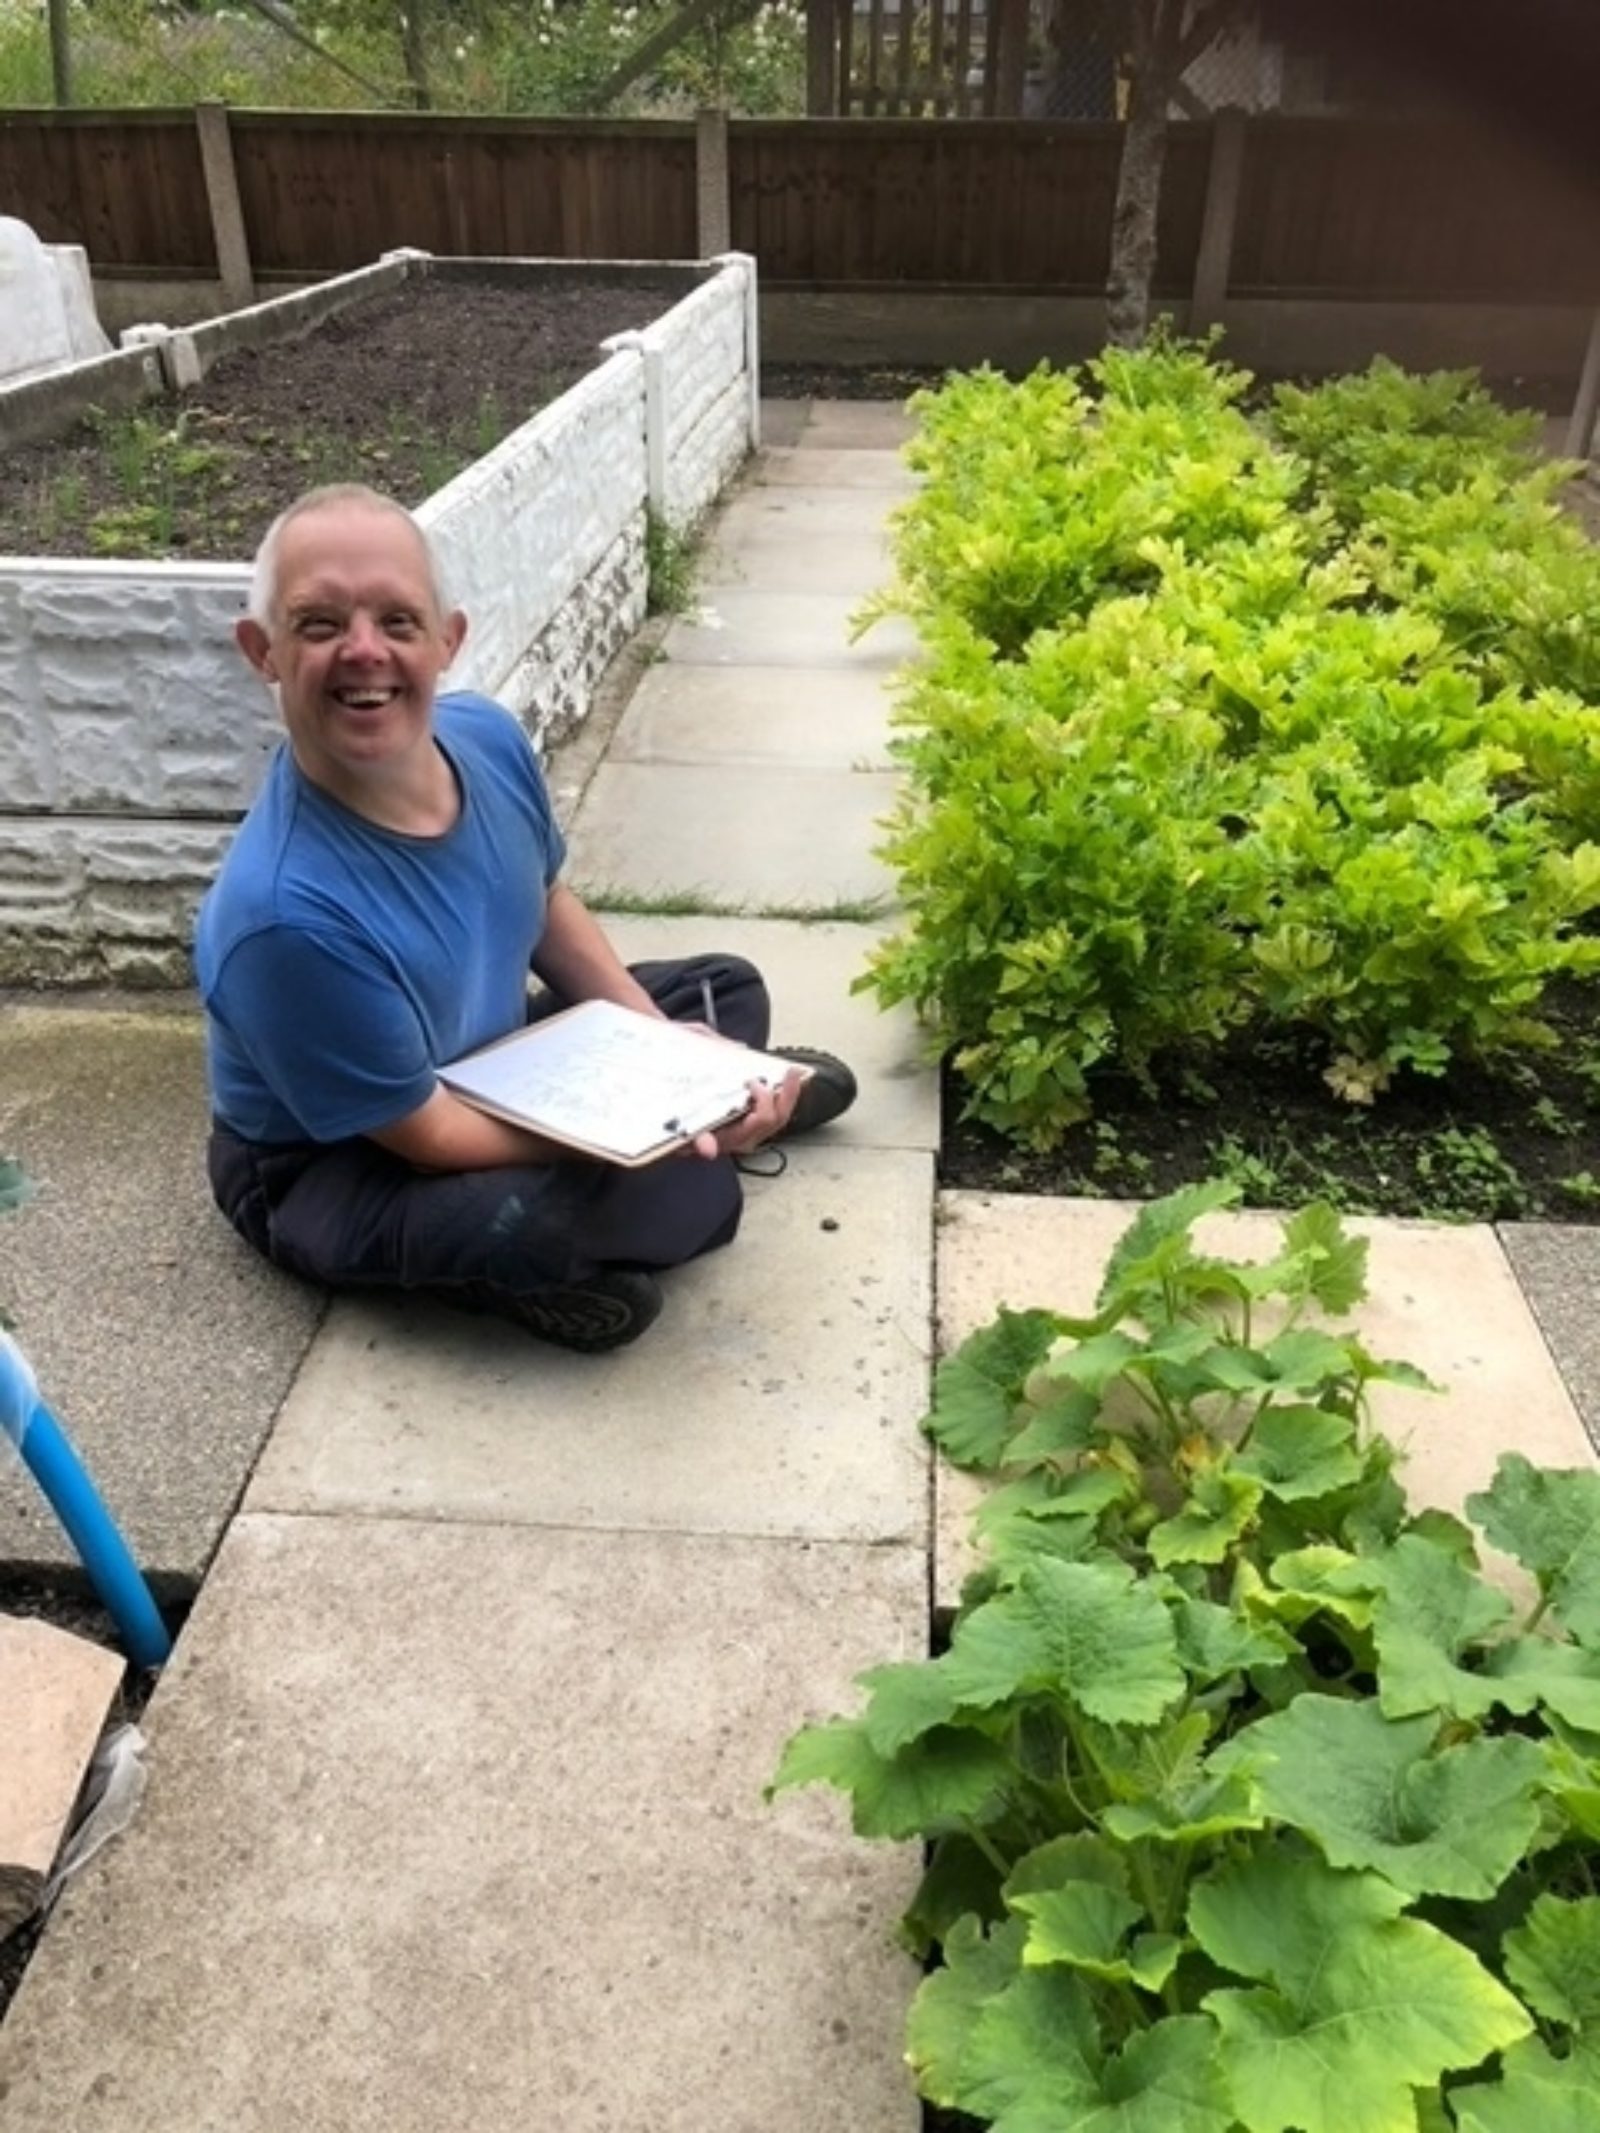 A workshop participant from Buzz Hub St Helens is smiling at the camera, sat on the floor in front of some green leafy plants with a pencil and clipboard.